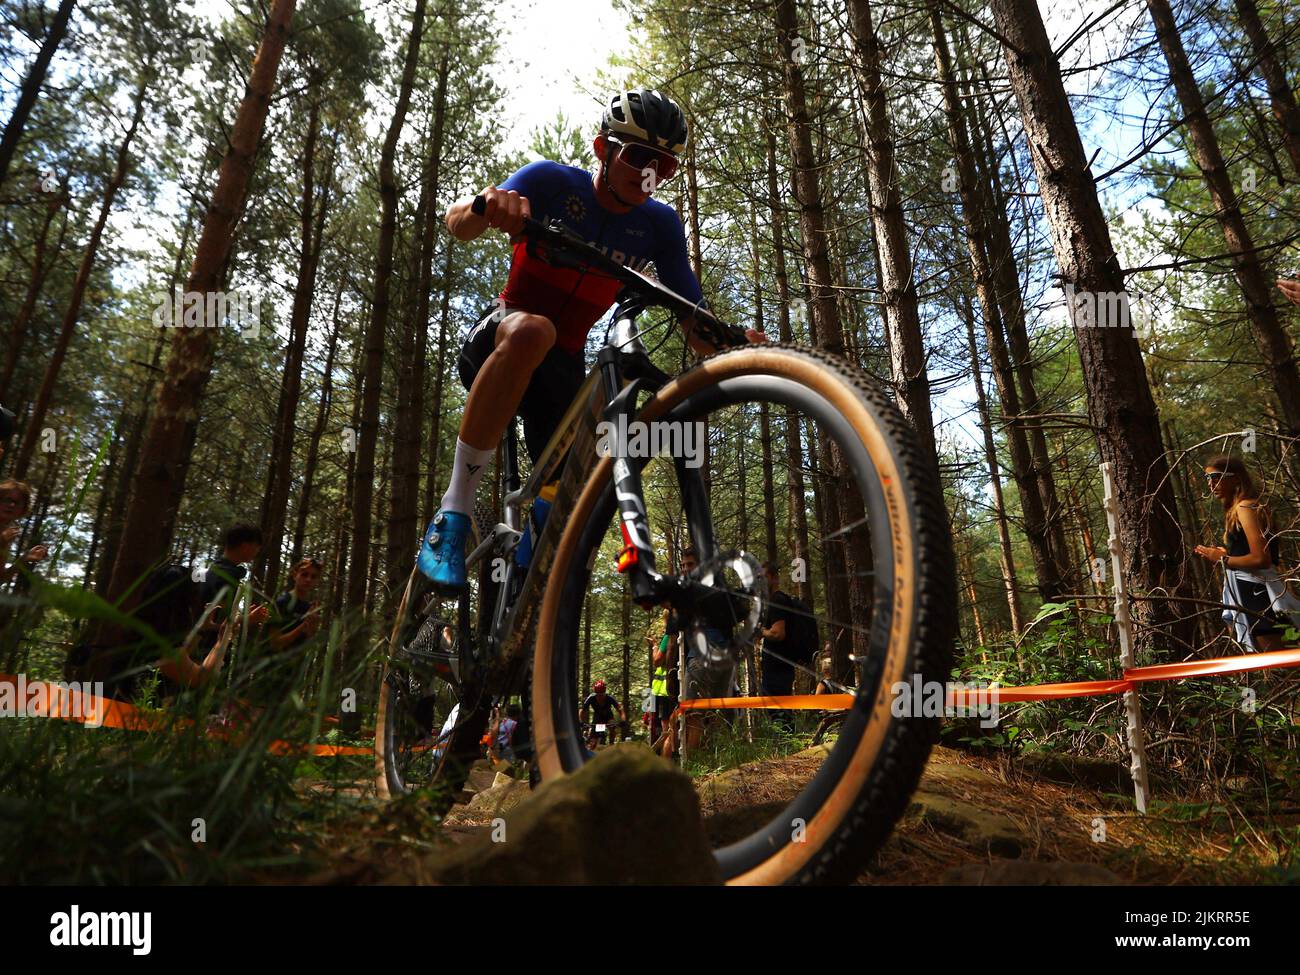 Commonwealth Games - Mountain Bike - Men's Cross-country - Final - Birches Valley, Rugeley, Birmingham, Britain - August 3, 2022 Namibia's Hugo Hahn in action REUTERS/Hannah Mckay Stock Photo